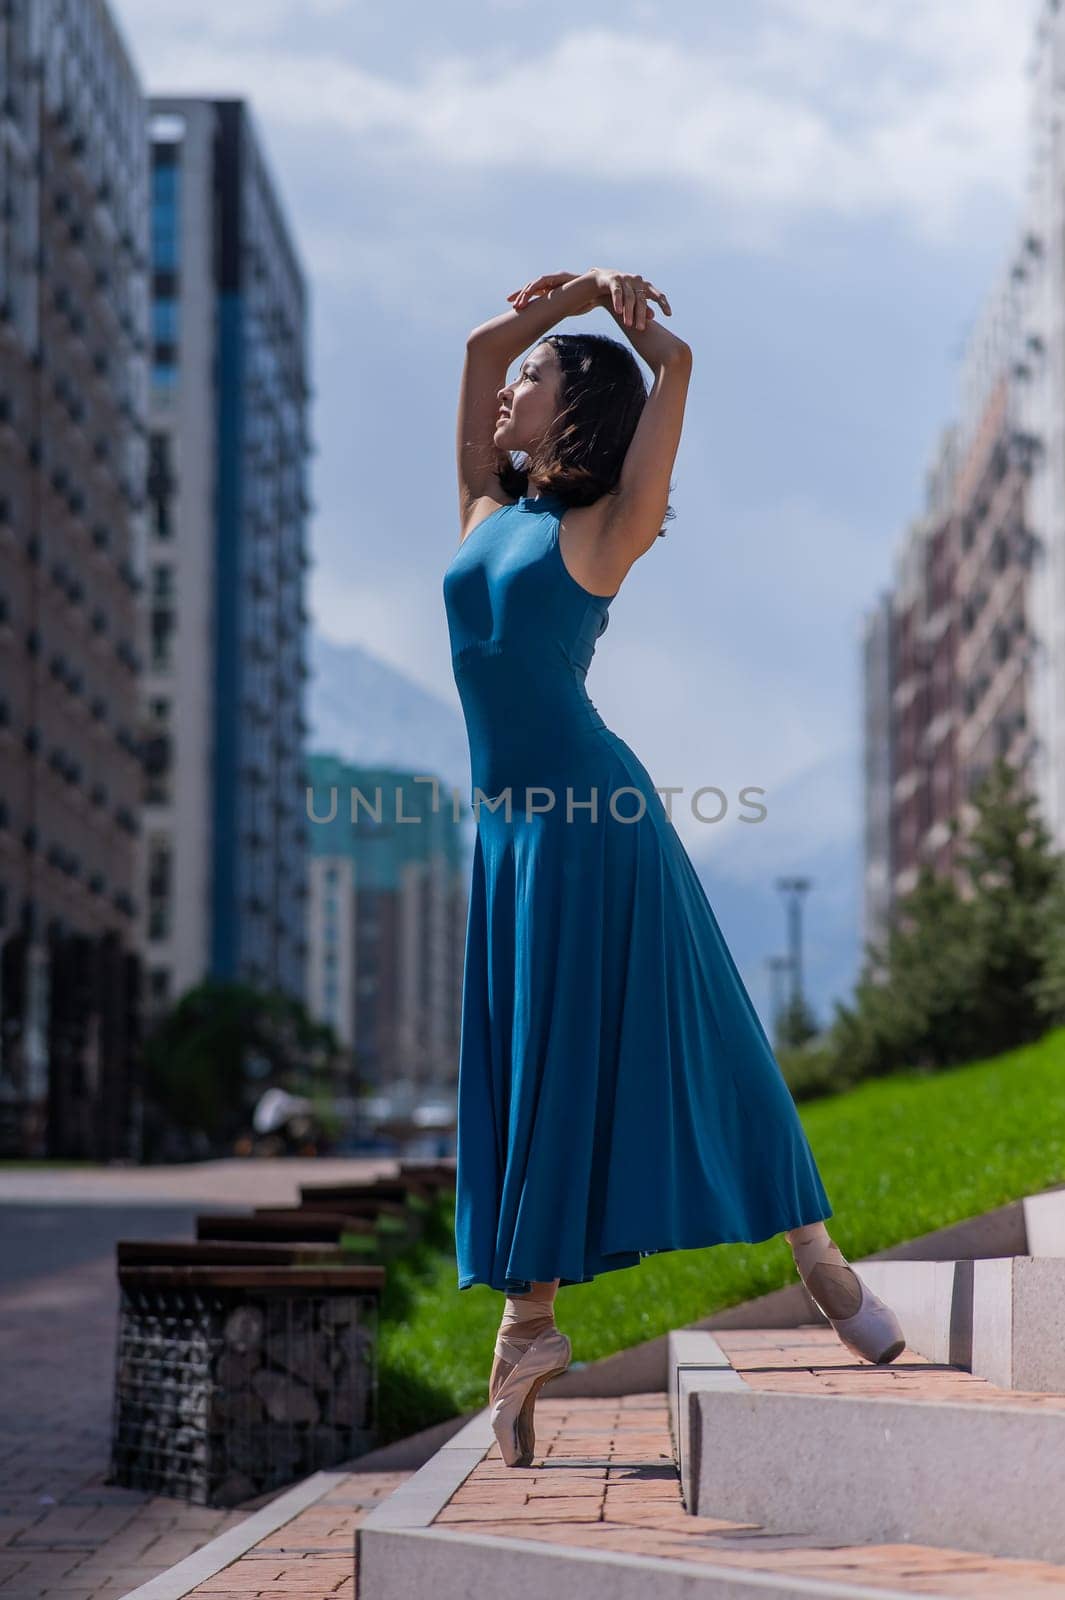 Beautiful Asian ballerina in blue dress posing on stairs outdoors. Urban landscape. by mrwed54